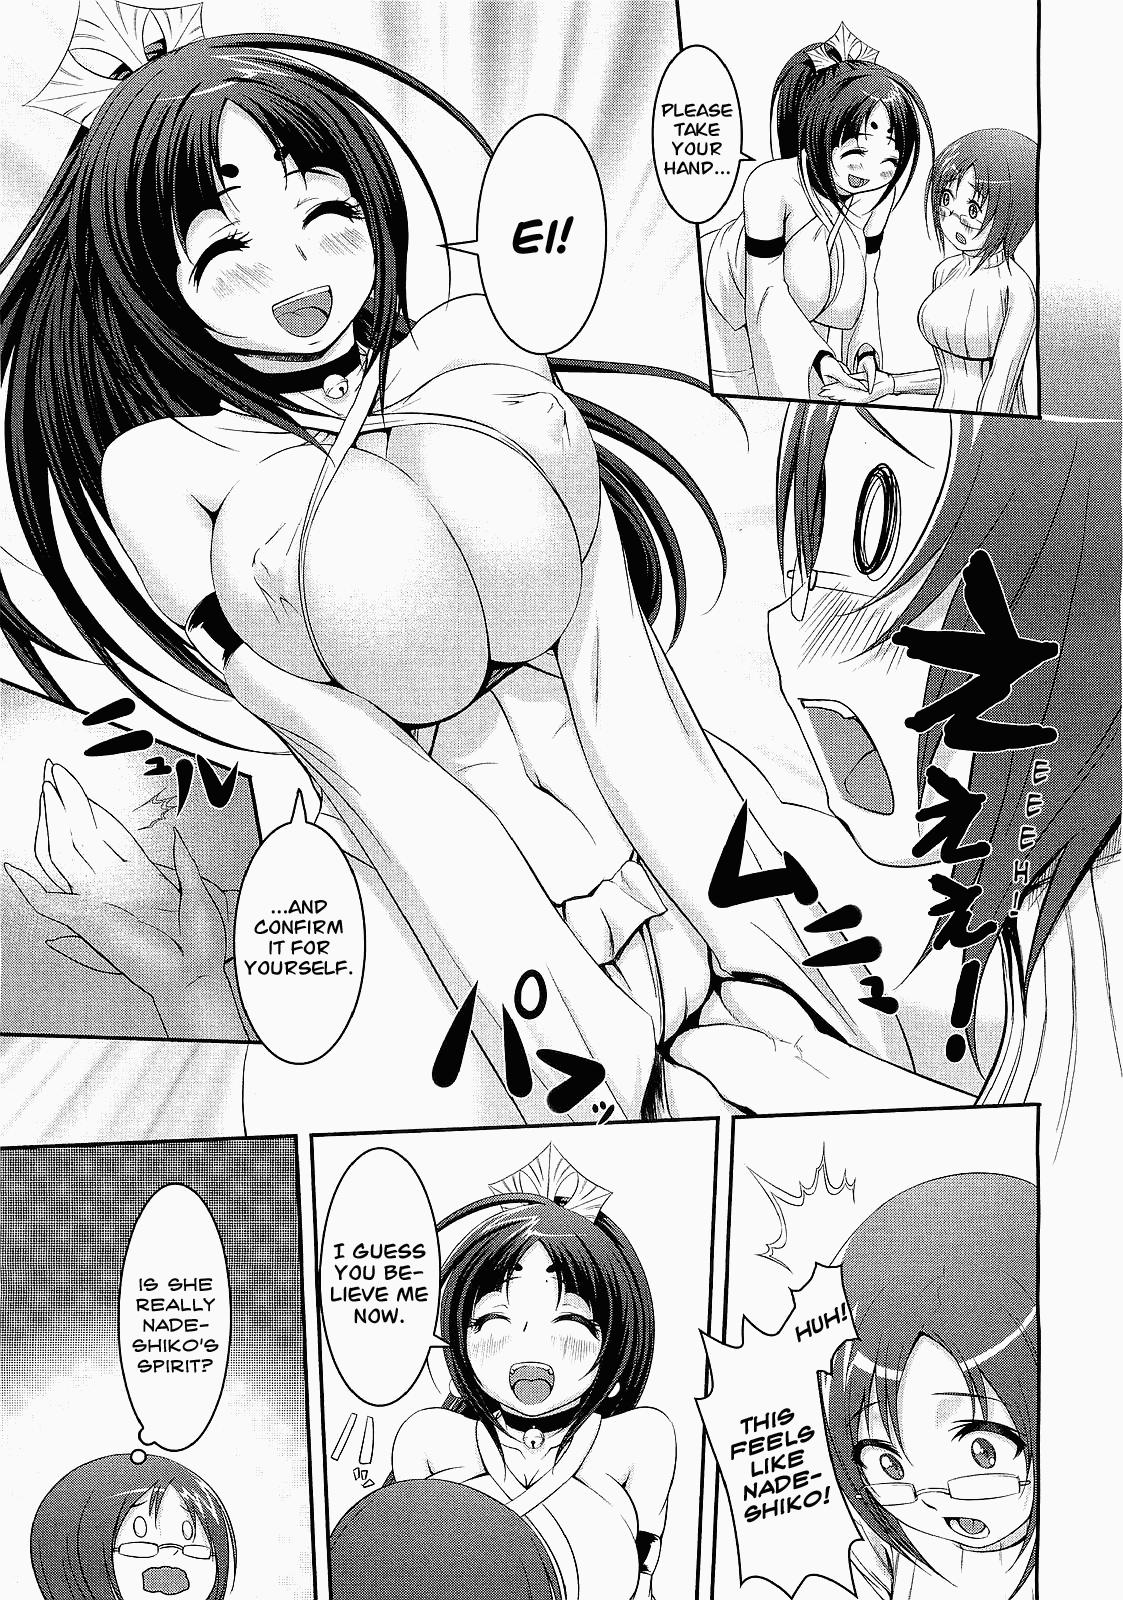 Naho of the Onahole 5